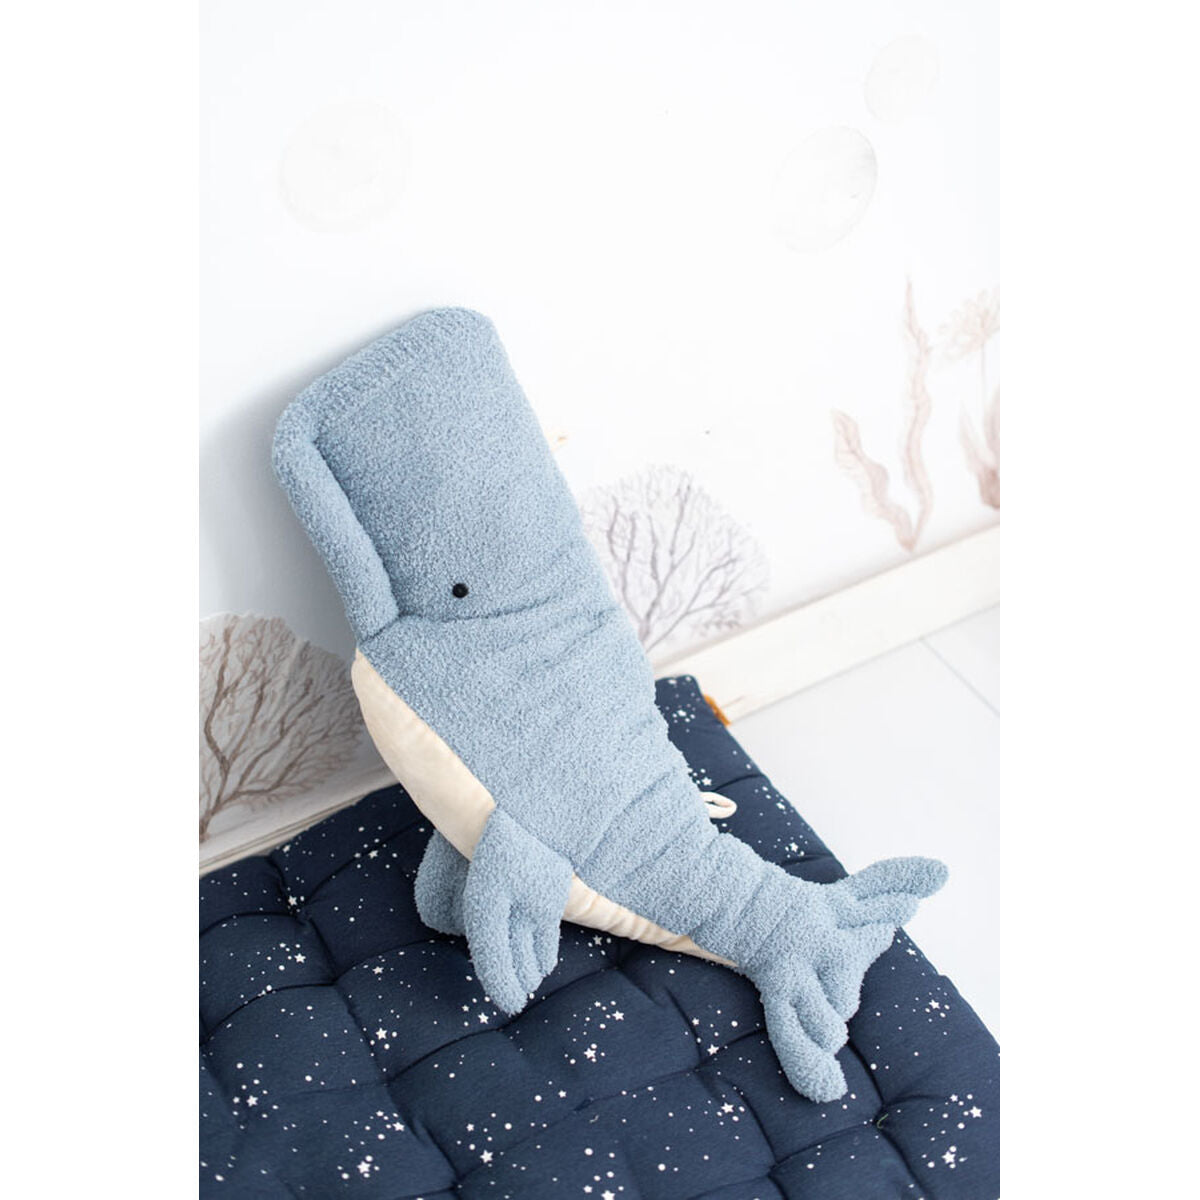 Fluffy toy Crochetts OCÉANO Blue White Octopus Whale Fish 29 x 84 x 14 cm 4 Pieces